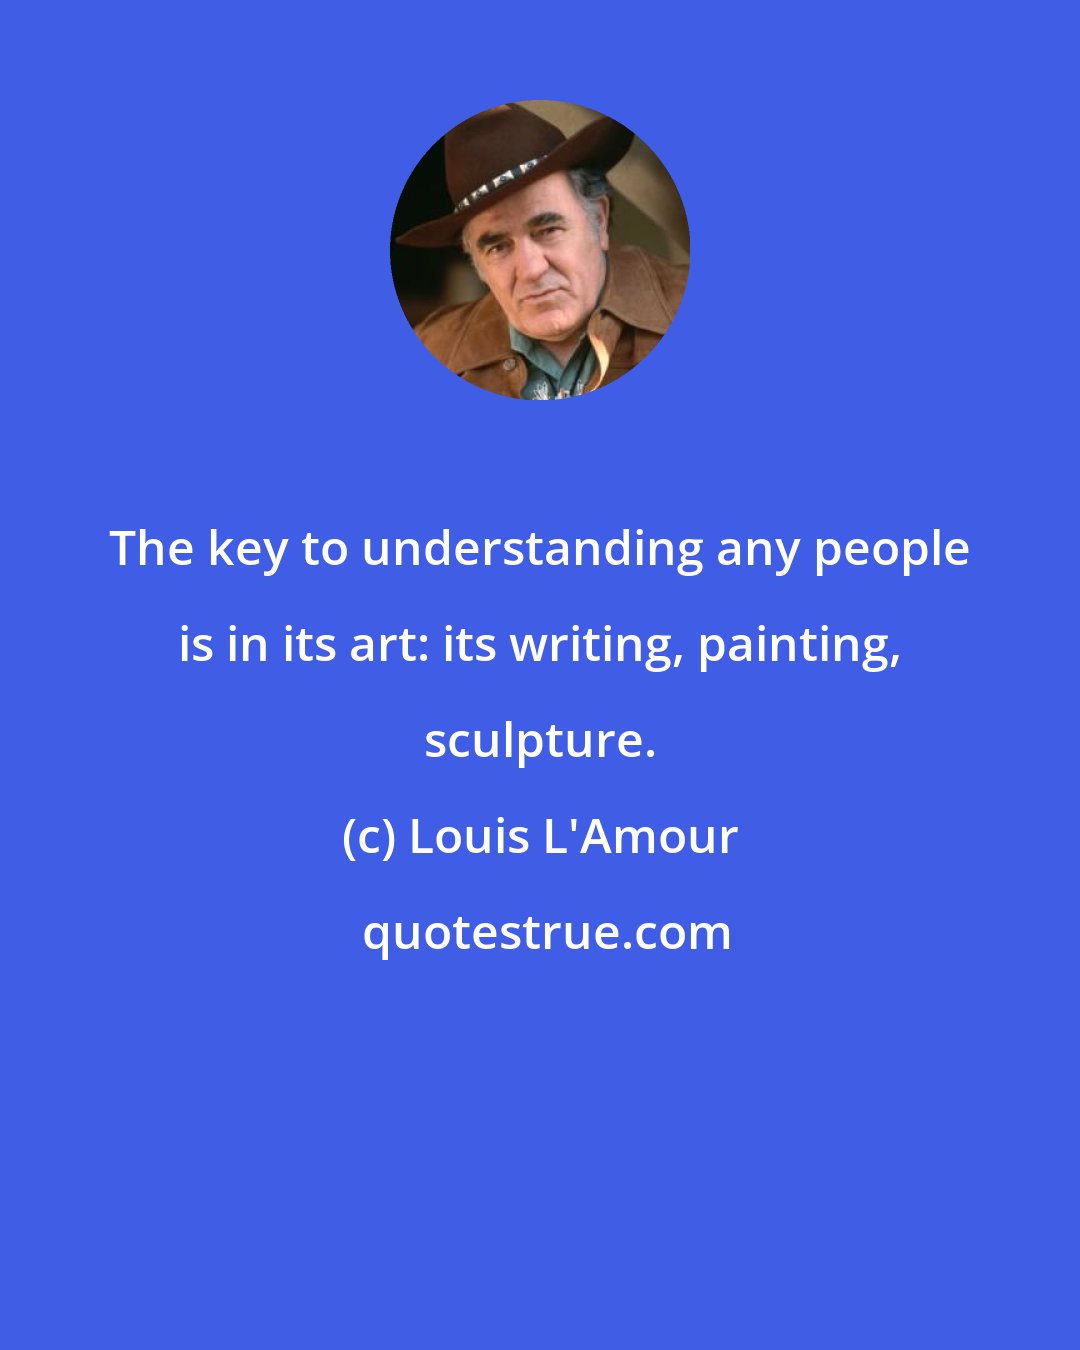 Louis L'Amour: The key to understanding any people is in its art: its writing, painting, sculpture.